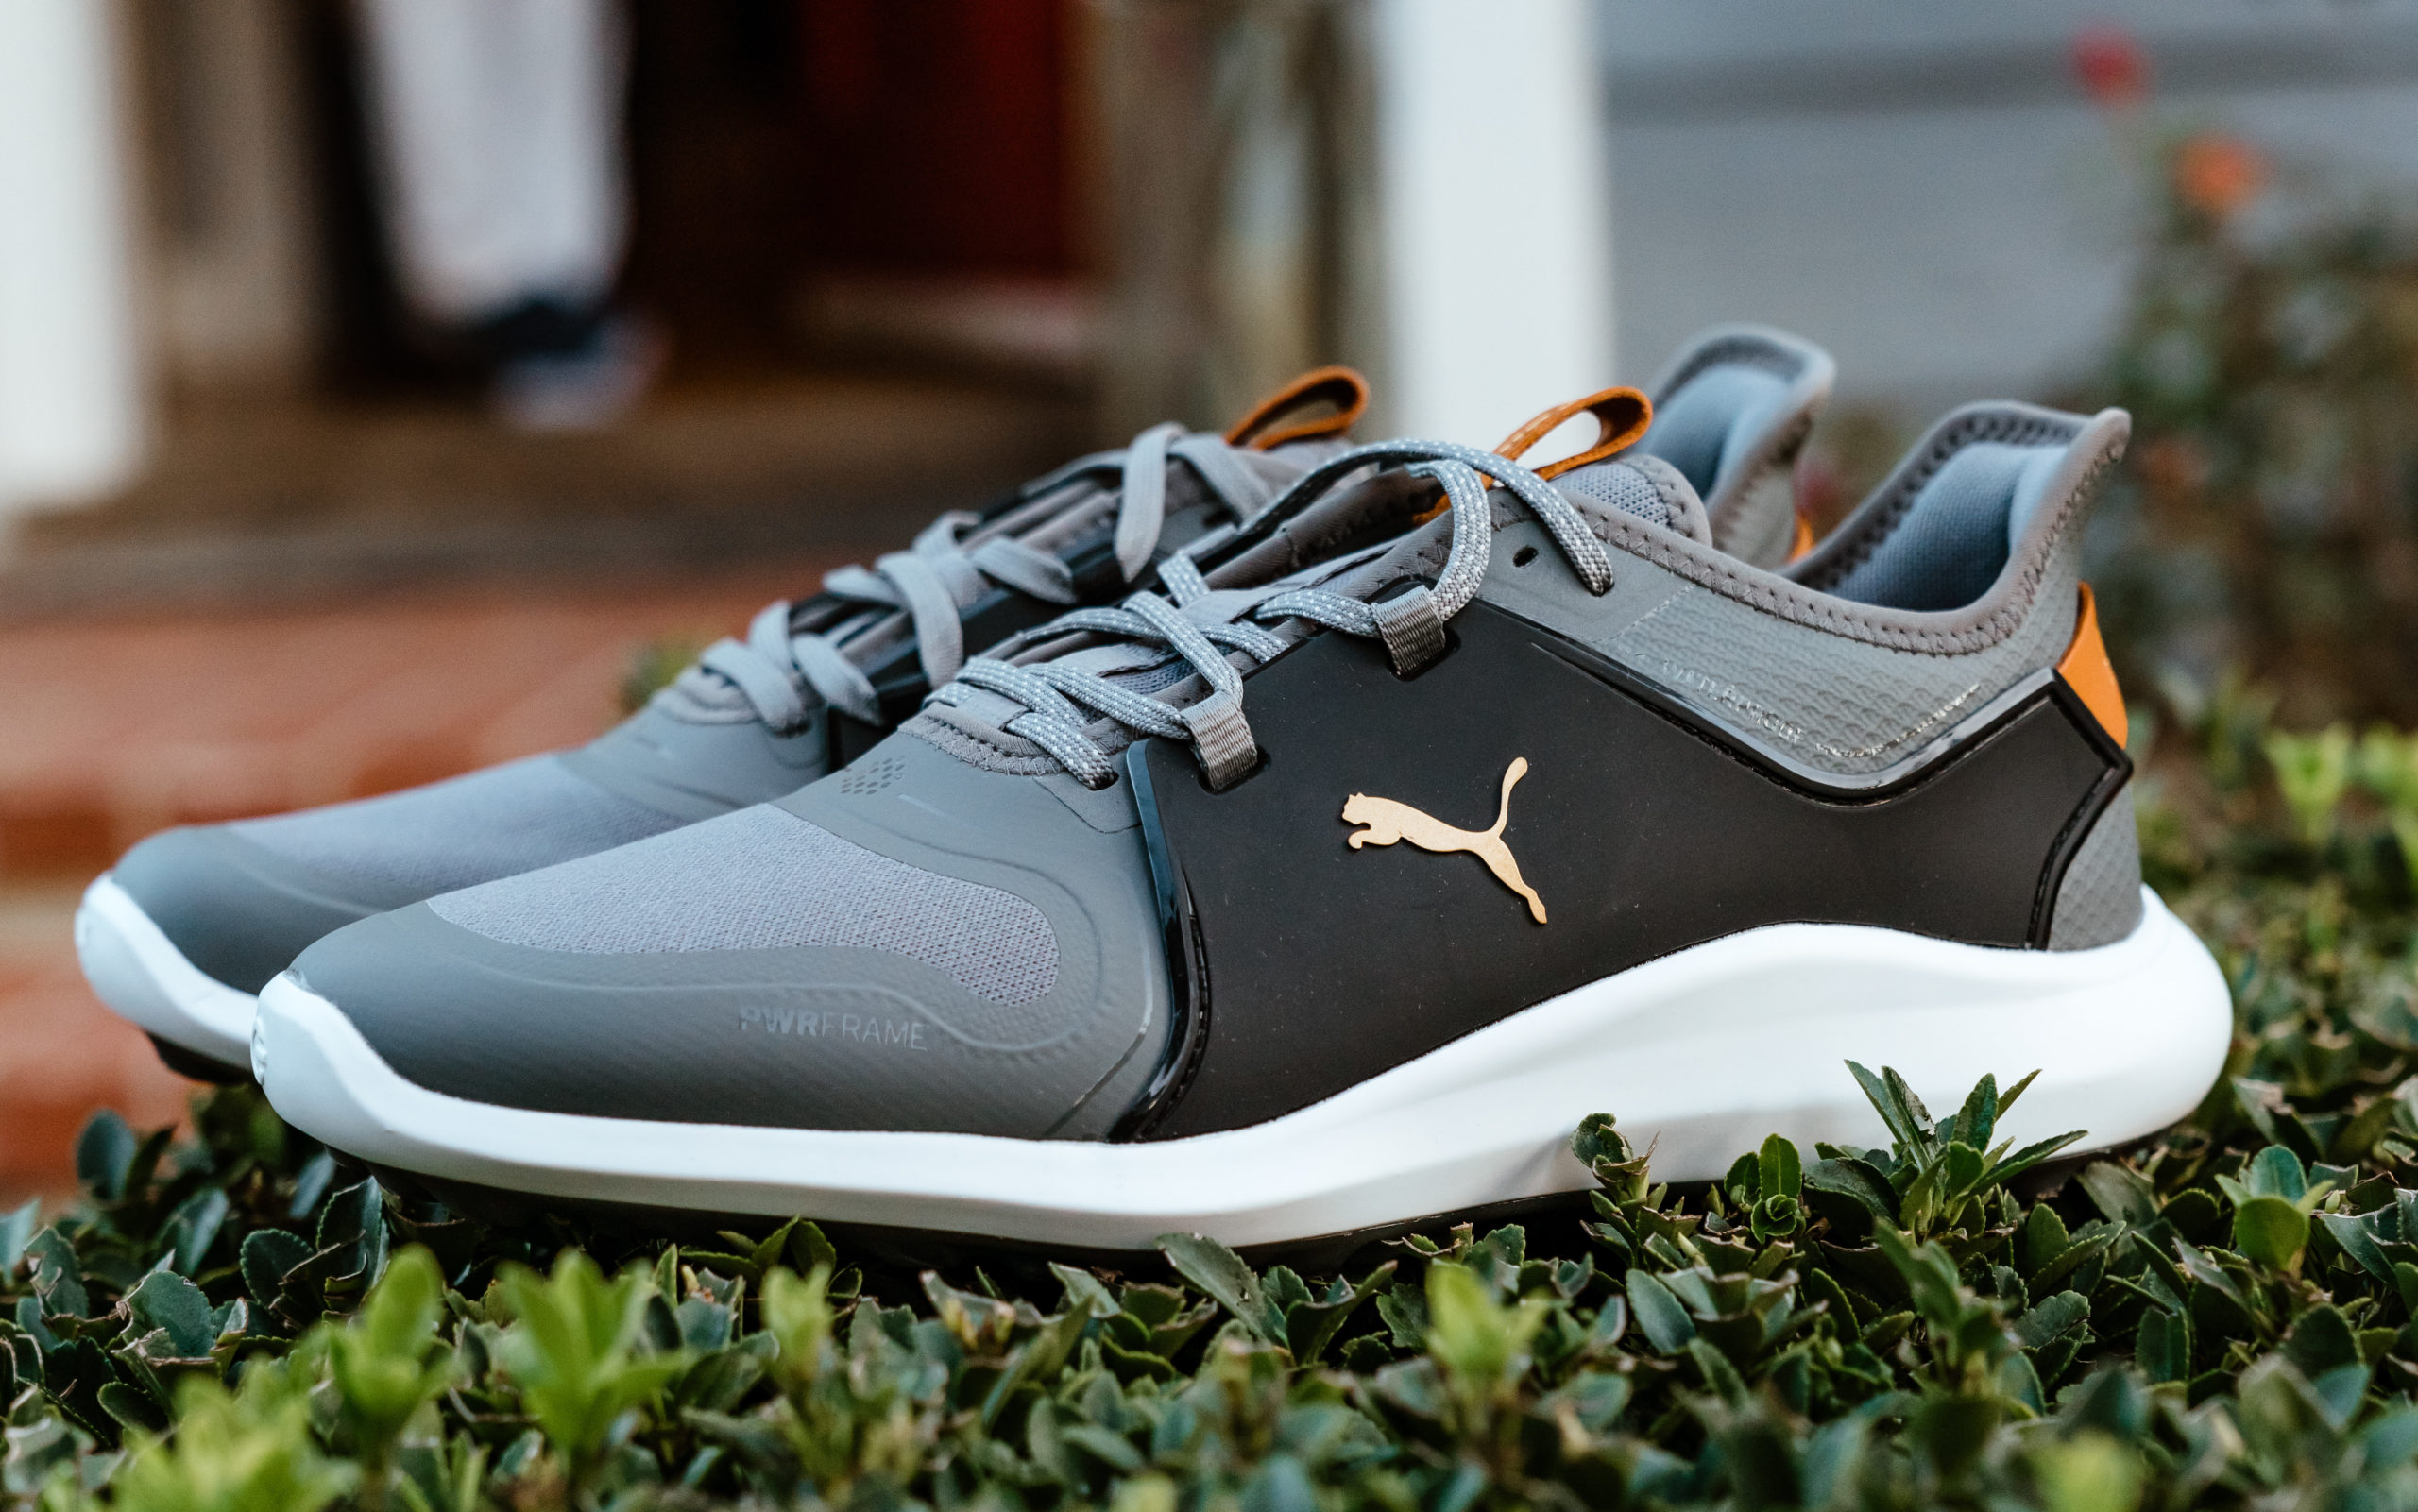 Puma Golf offers a more exact fit with their Ignite Fasten8 golf shoes